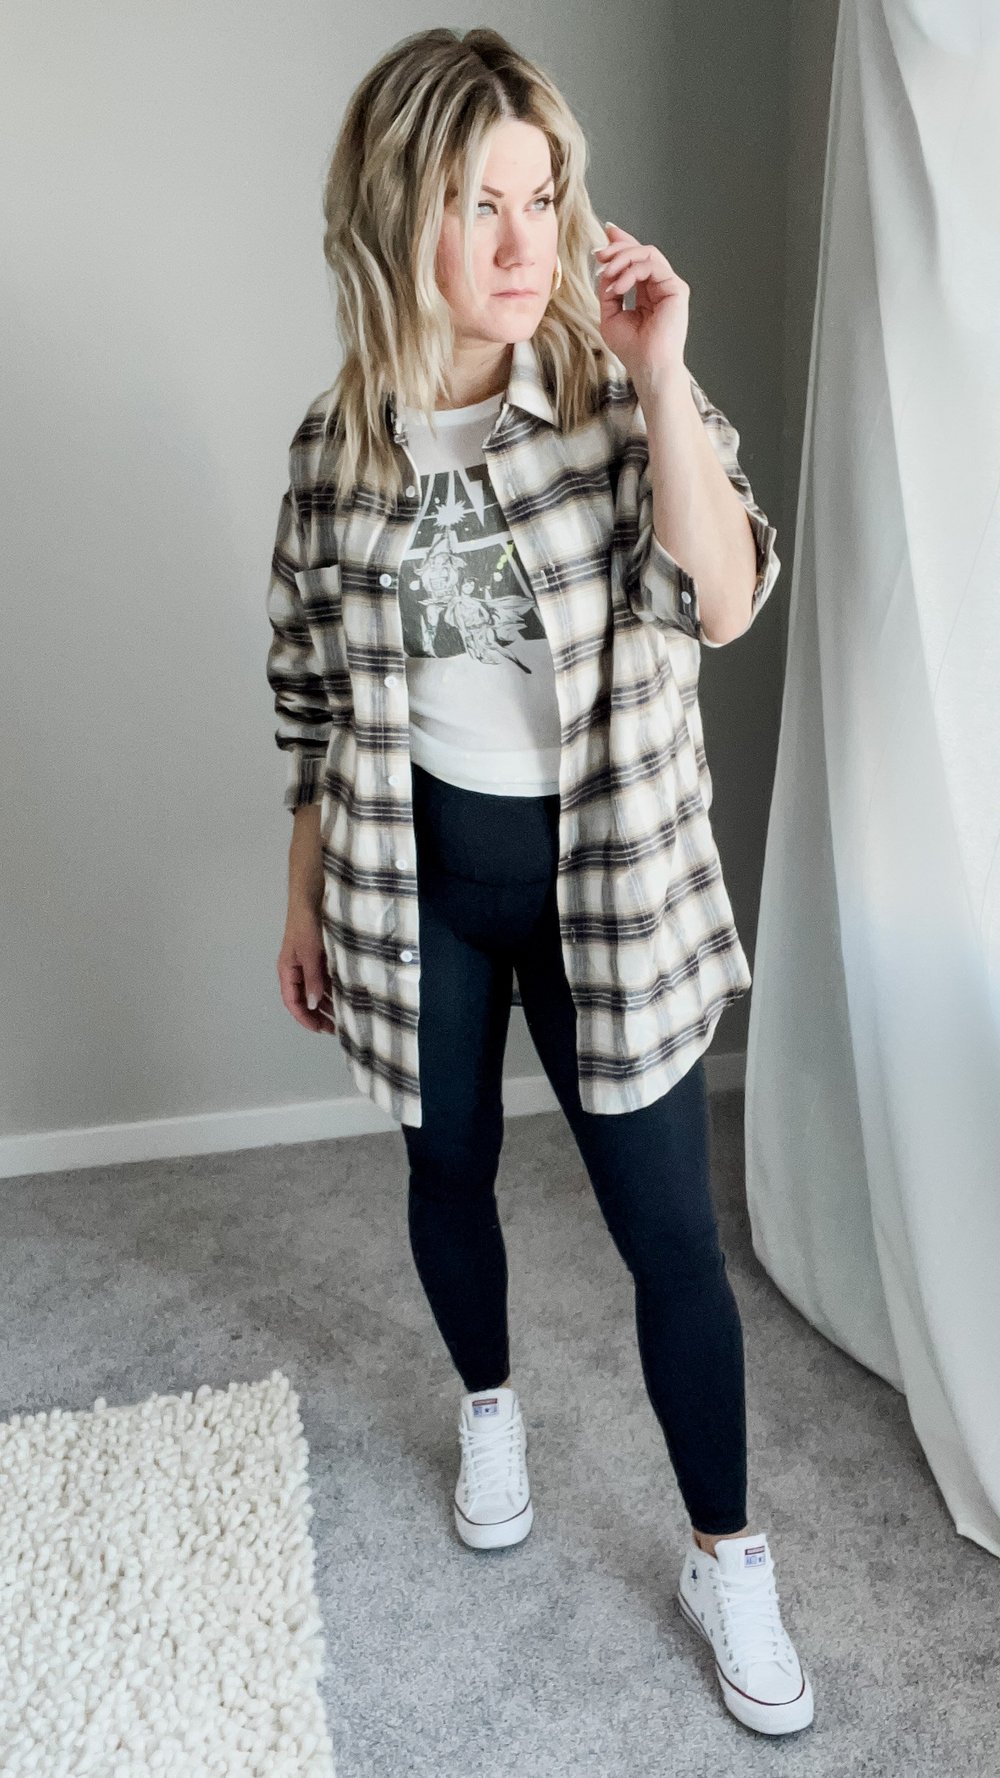 HOW TO STYLE FLANNEL WITH YOUR T-SHIRT: